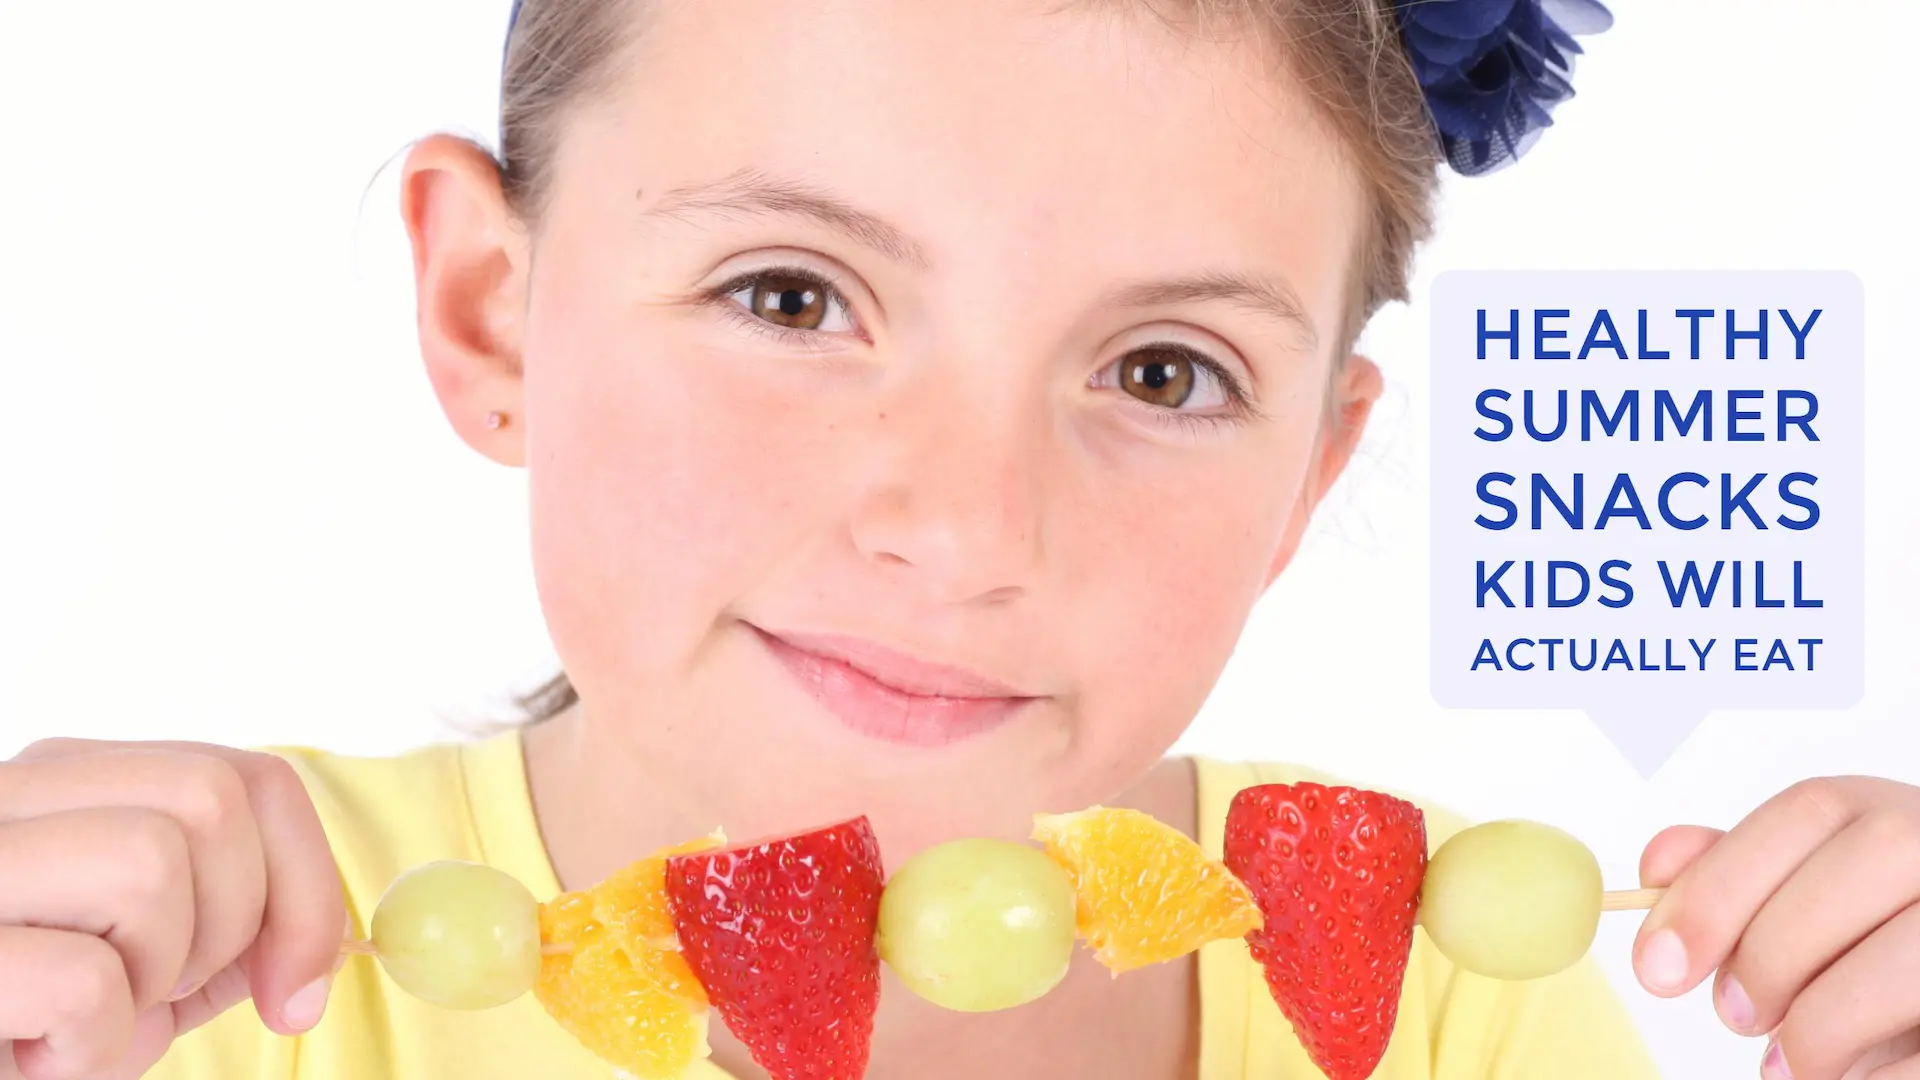 7 Healthy Summer Snacks Kids Will Actually Eat